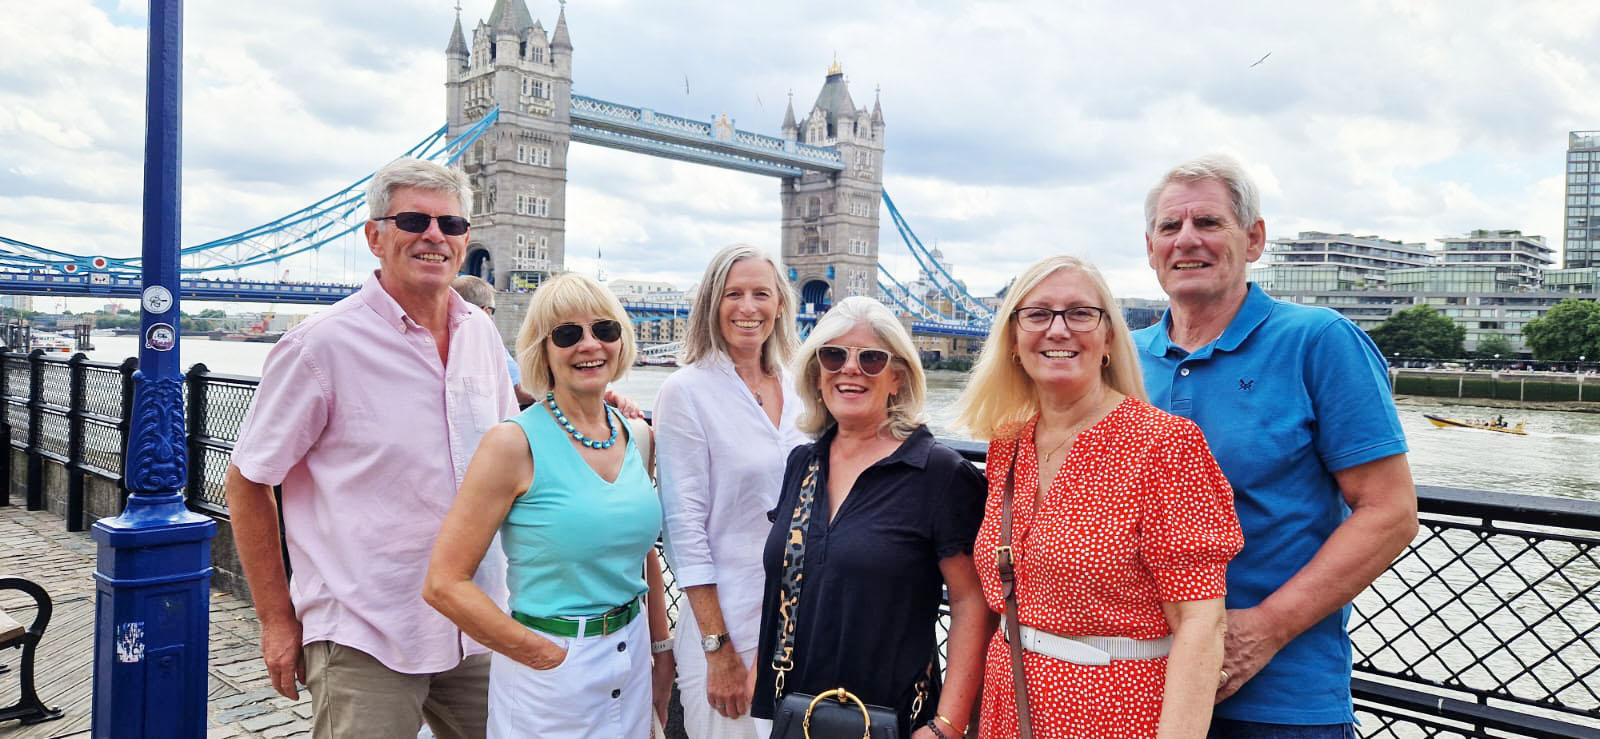 Gail Hanlon from Is This Mutton with family in front of Tower Bridge in London